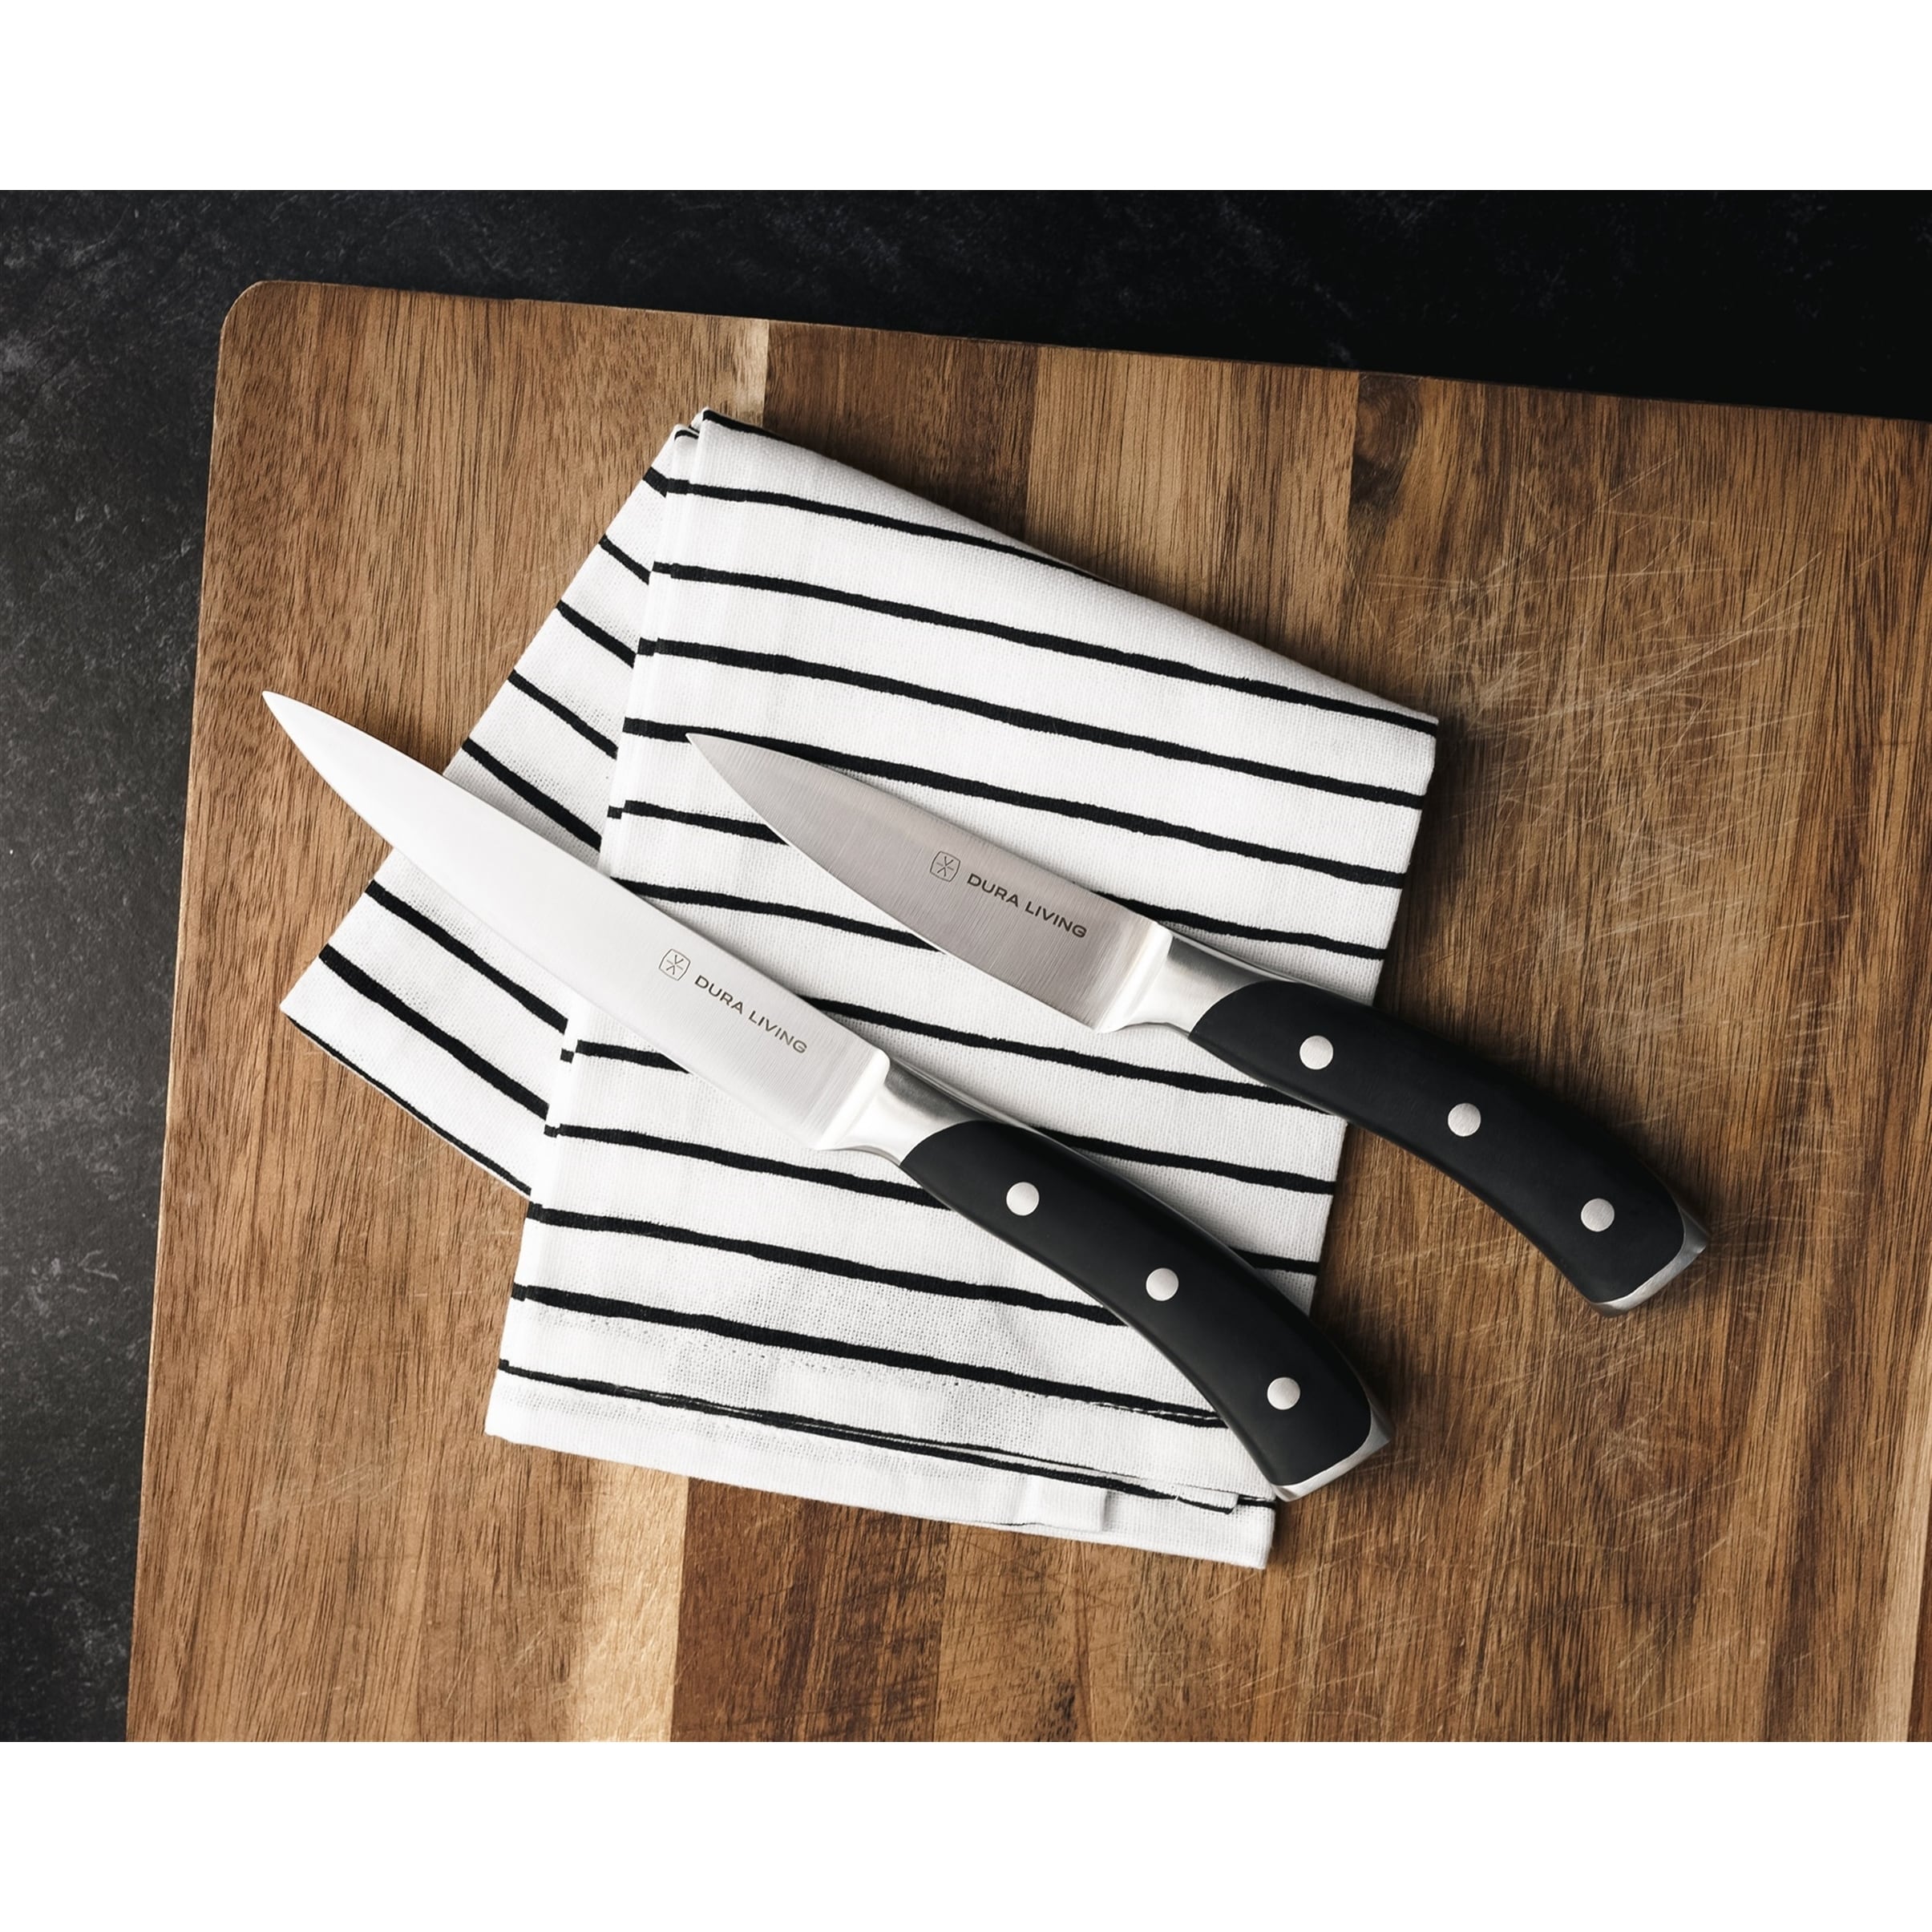 https://ak1.ostkcdn.com/images/products/is/images/direct/088b981abf28b58042f070672df408053e039df1/Dura-Living-Elite-2-Piece-Kitchen-Knife-Set---Forged-German-Stainless-Steel-Cooking-Knives%2C-Black.jpg